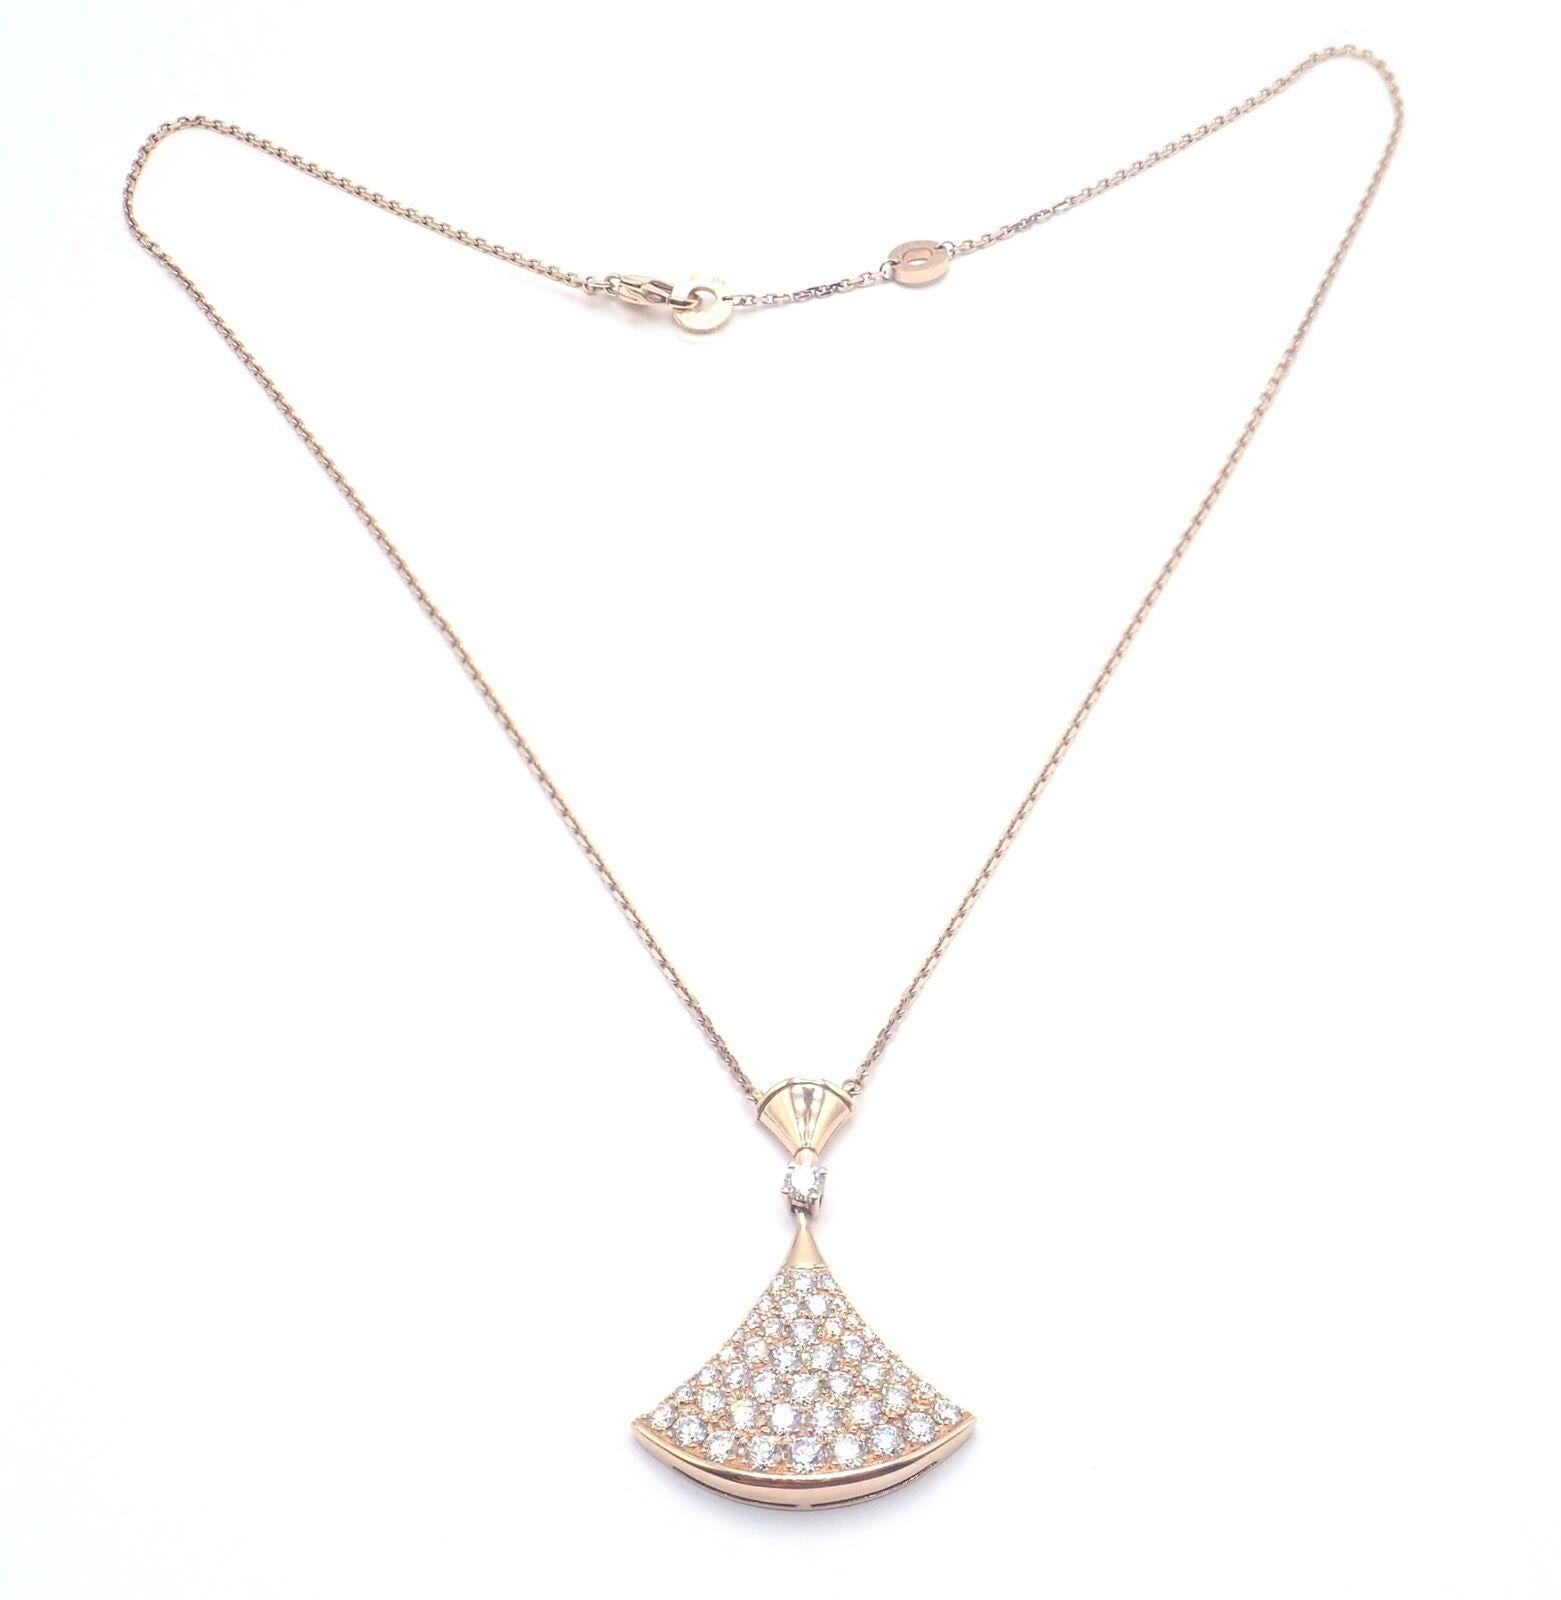 18k Rose Gold Diamond Large Diva Pendant Necklace by Bulgari. 
With 43 Round brilliant cut VS1 clarity, E color diamonds total weight approximately 2.14ct
This necklace retails for $24,200 plus tax.
Details:
Weight: 9.7 grams
Measurements: Length